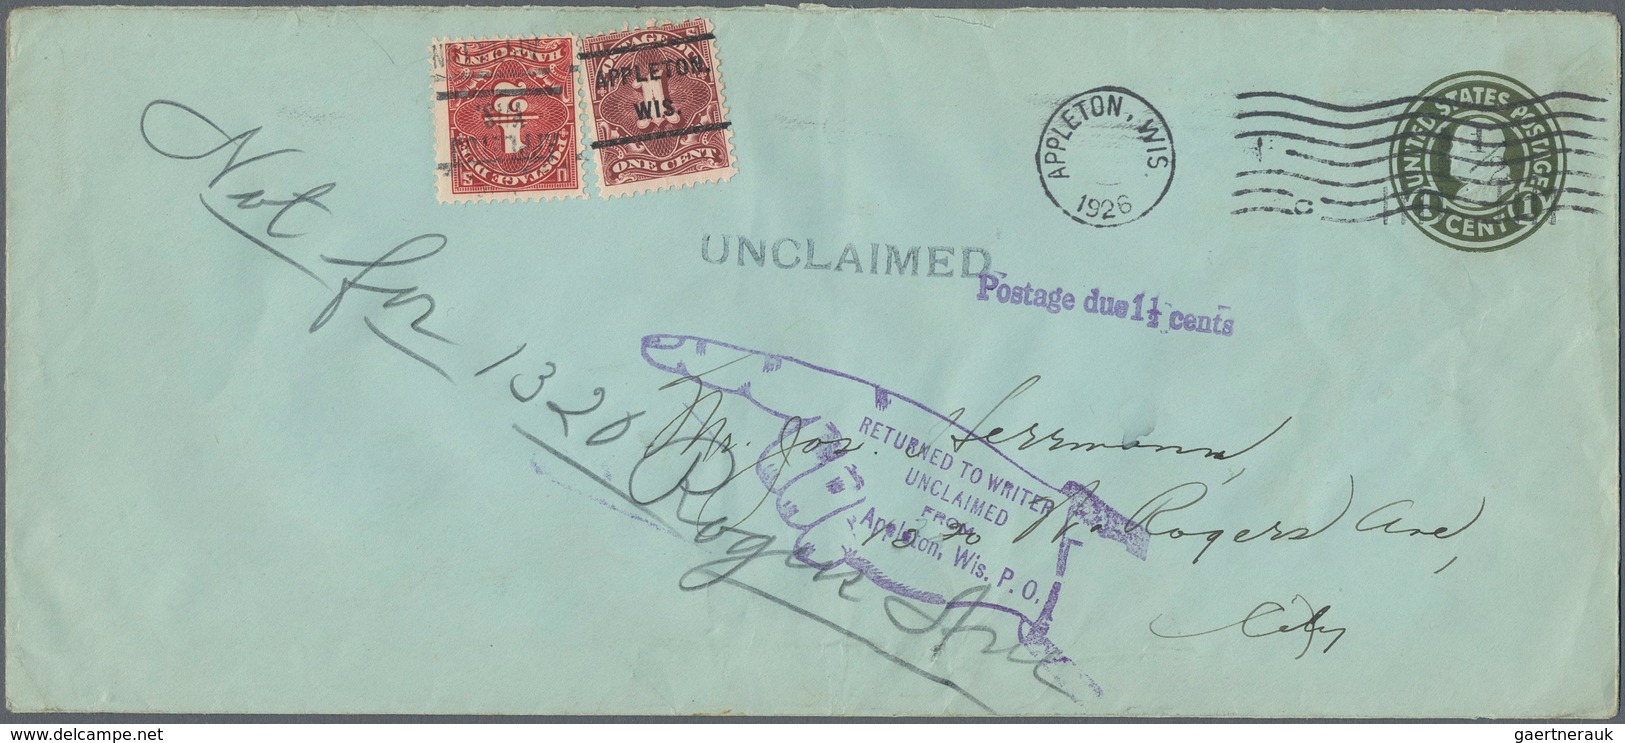 Alle Welt: from 1880 holding of ca. 870 unused/CTO-used and used postal stationeries, incl. postal s